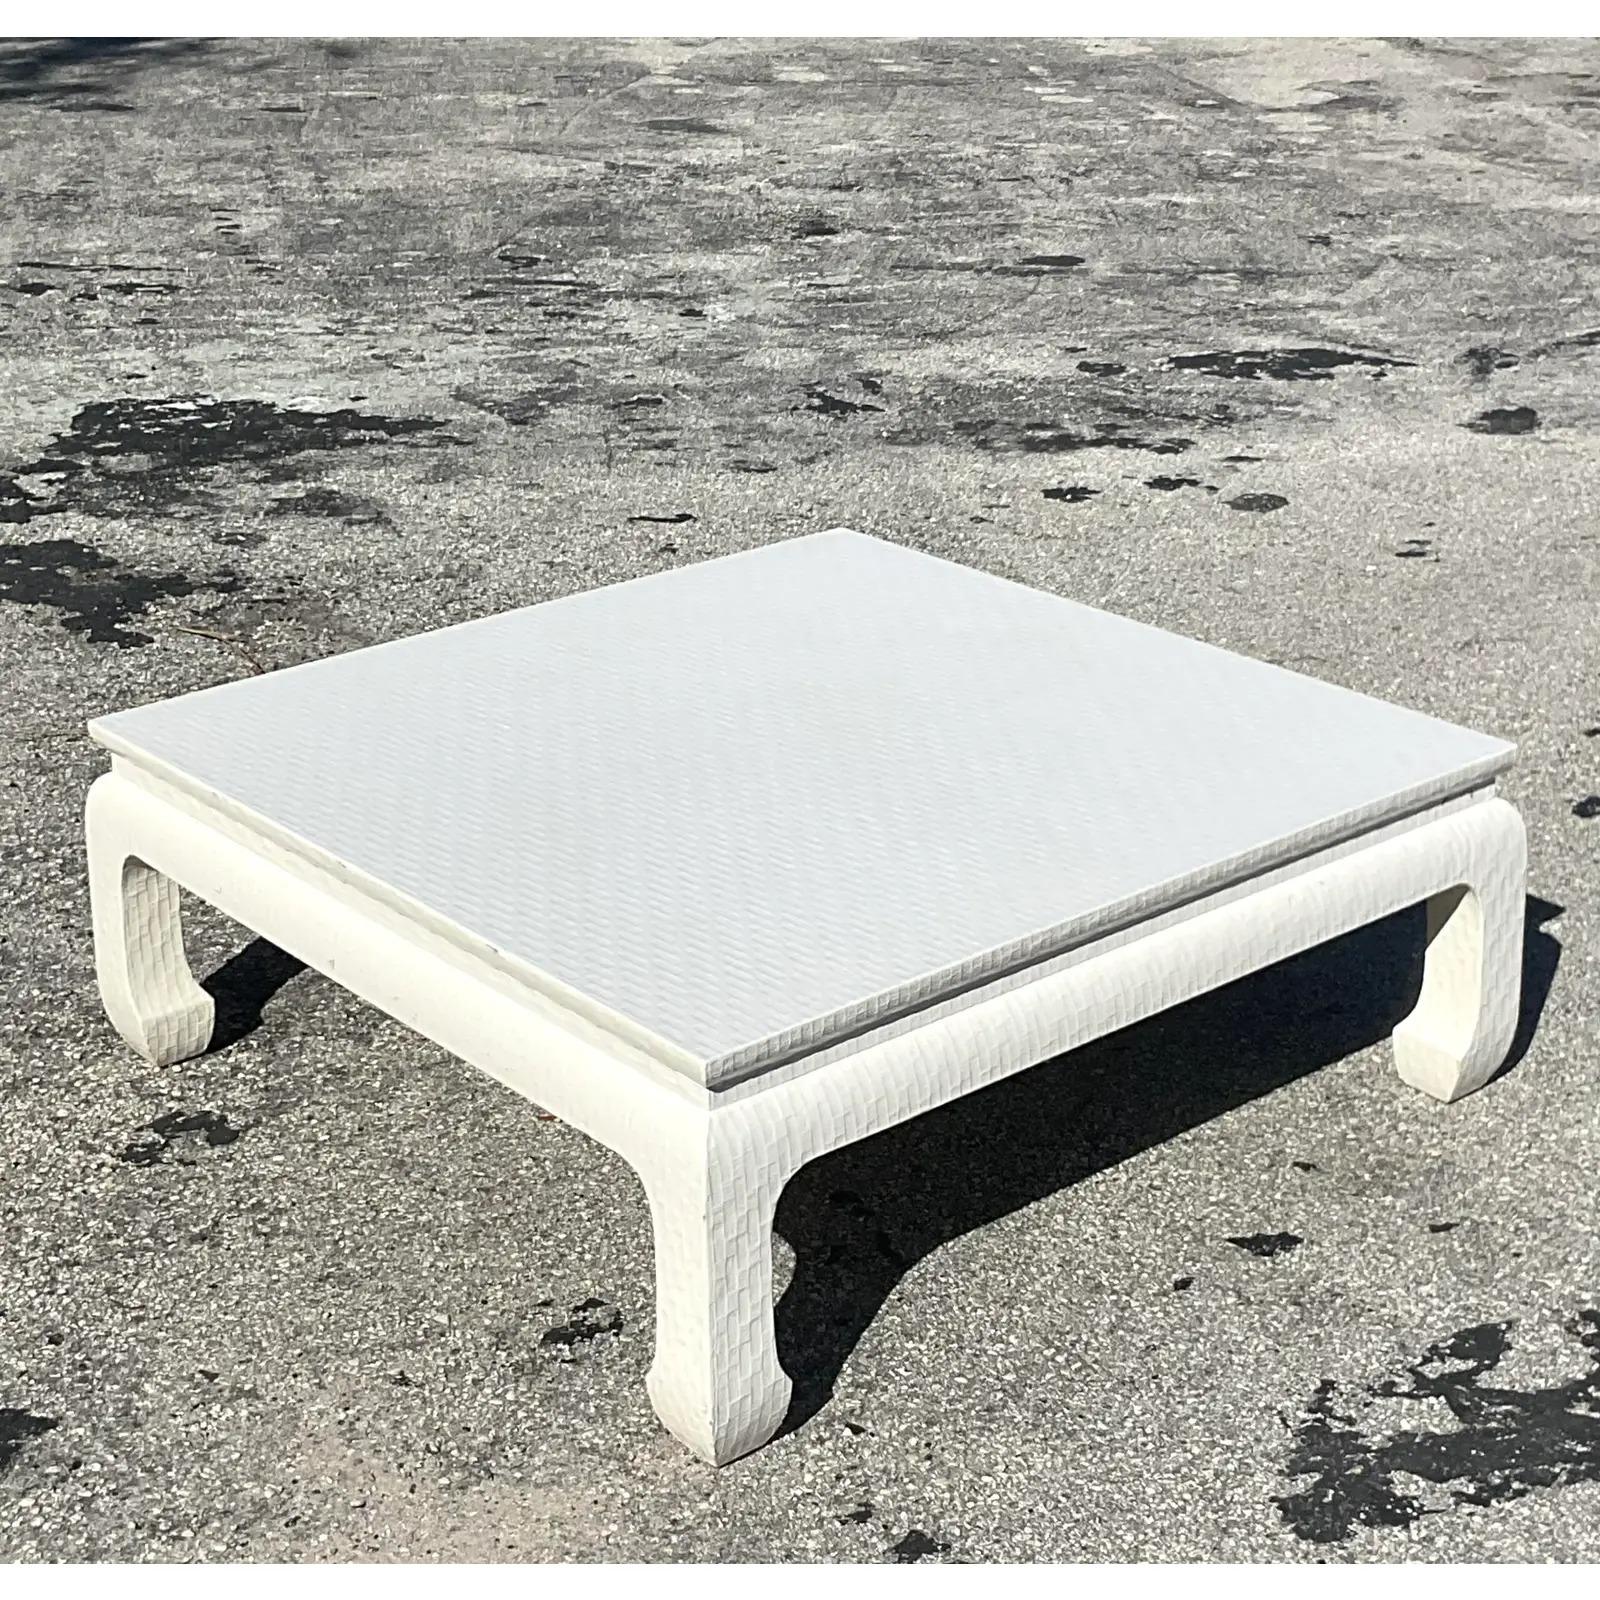 A fabulous vintage coastal coffee table. Made by the iconic Baker Furniture group. Beautiful lacquered Grasscloth in a gloss ivory shade. Marked on the bottom. Acquired from a Palm Beach estate.